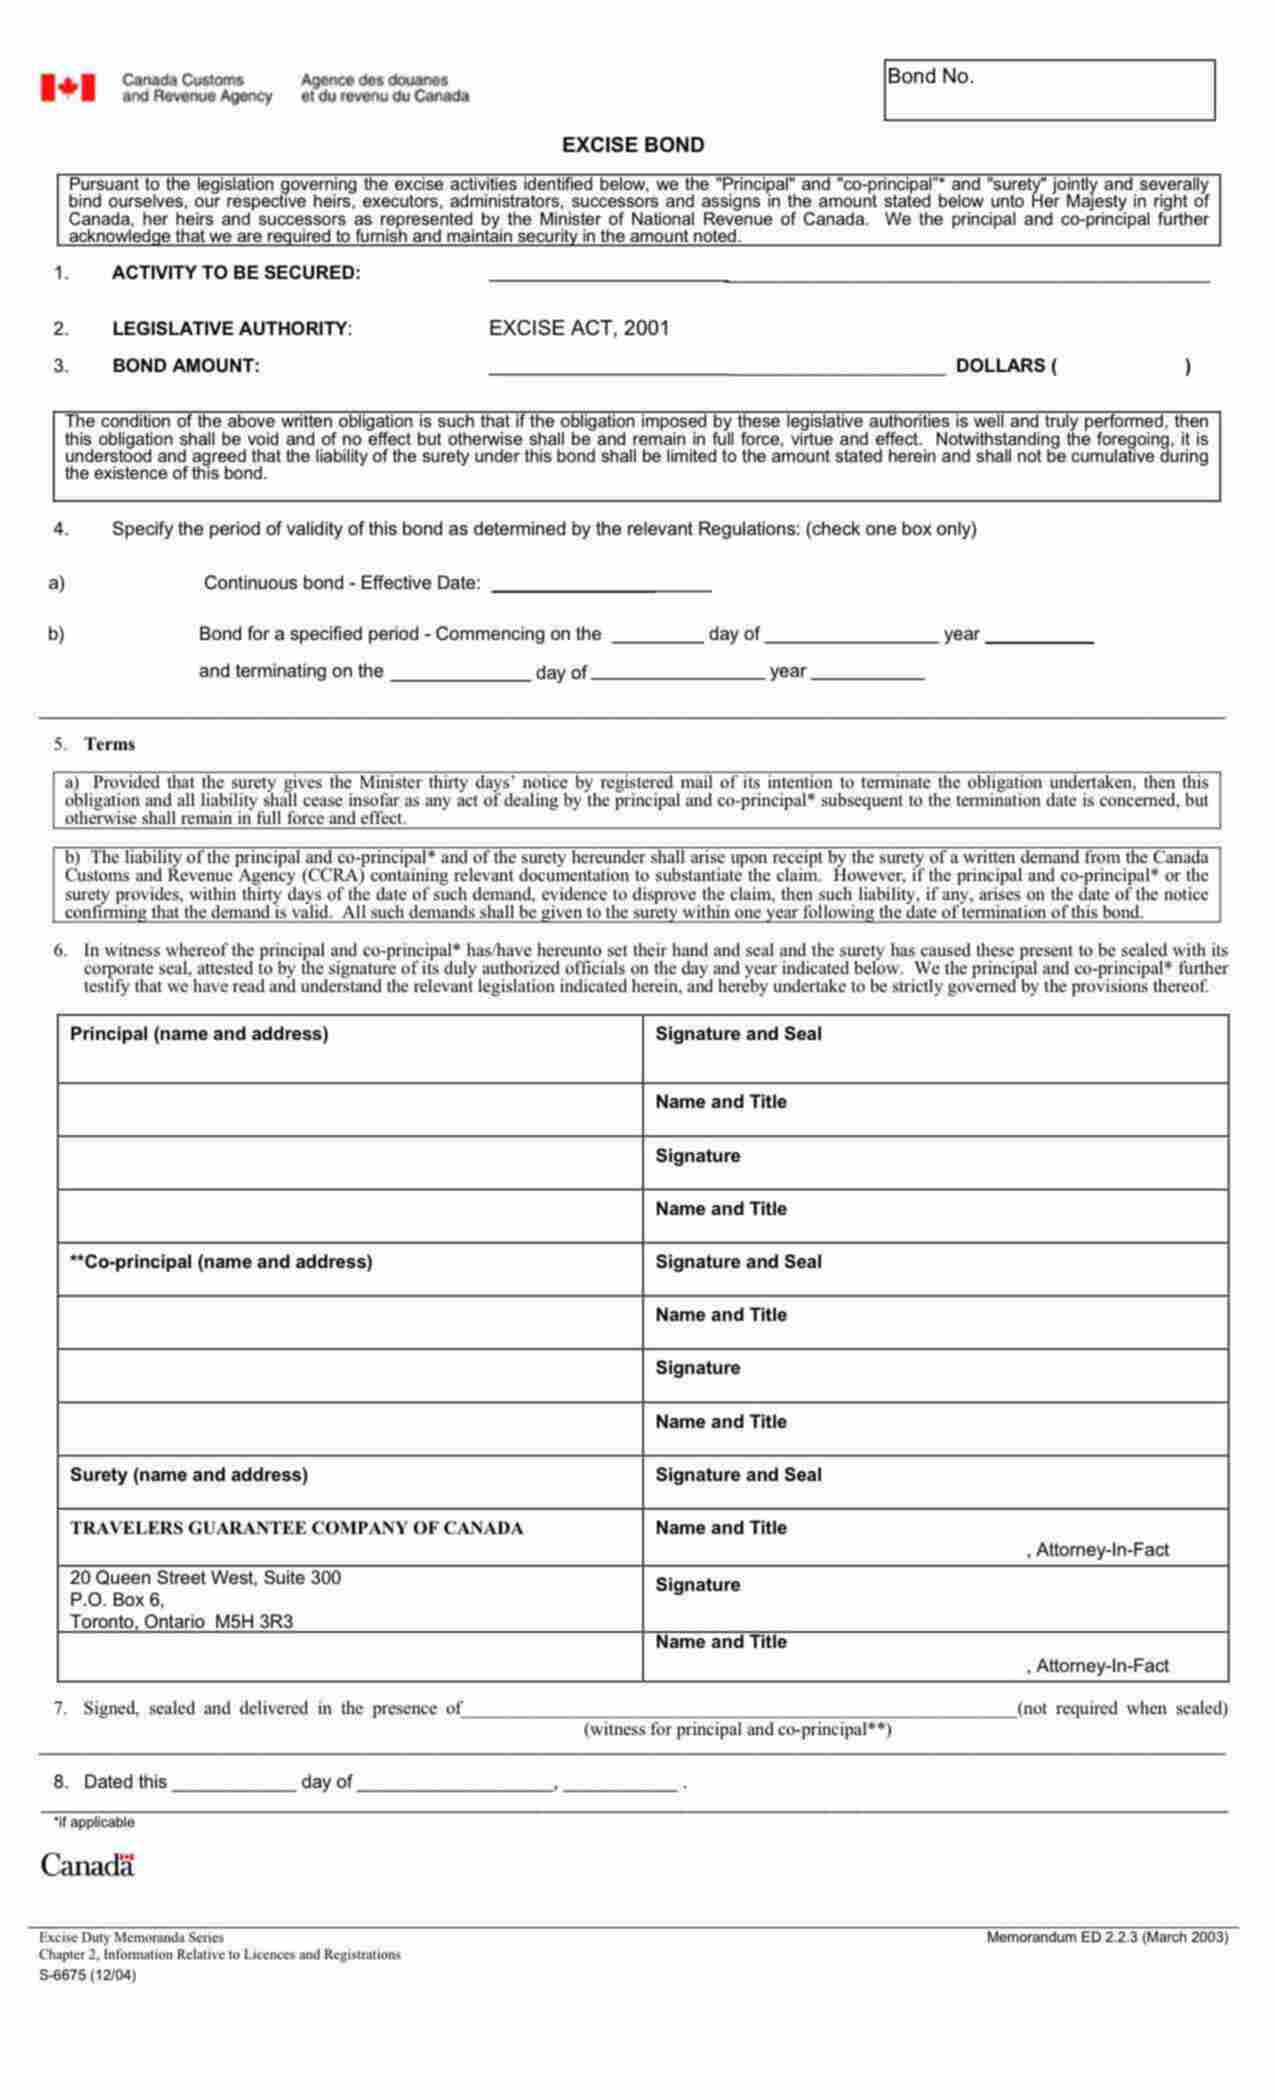 Canada Excise Tax: Non Resident Bond Form